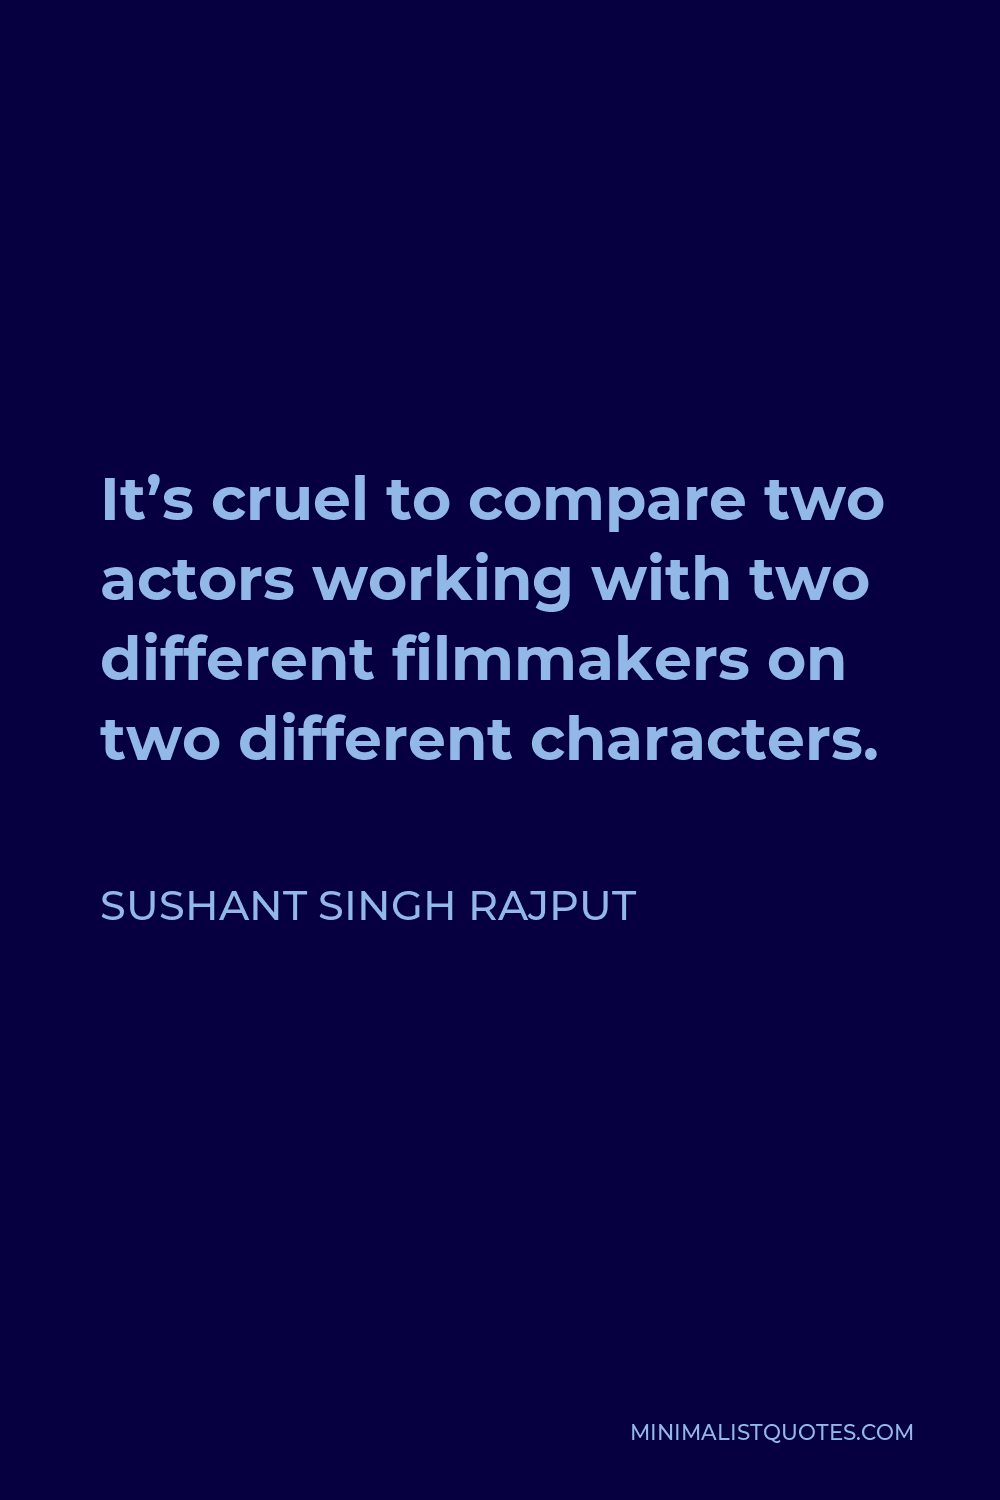 Sushant Singh Rajput Quote - It’s cruel to compare two actors working with two different filmmakers on two different characters.